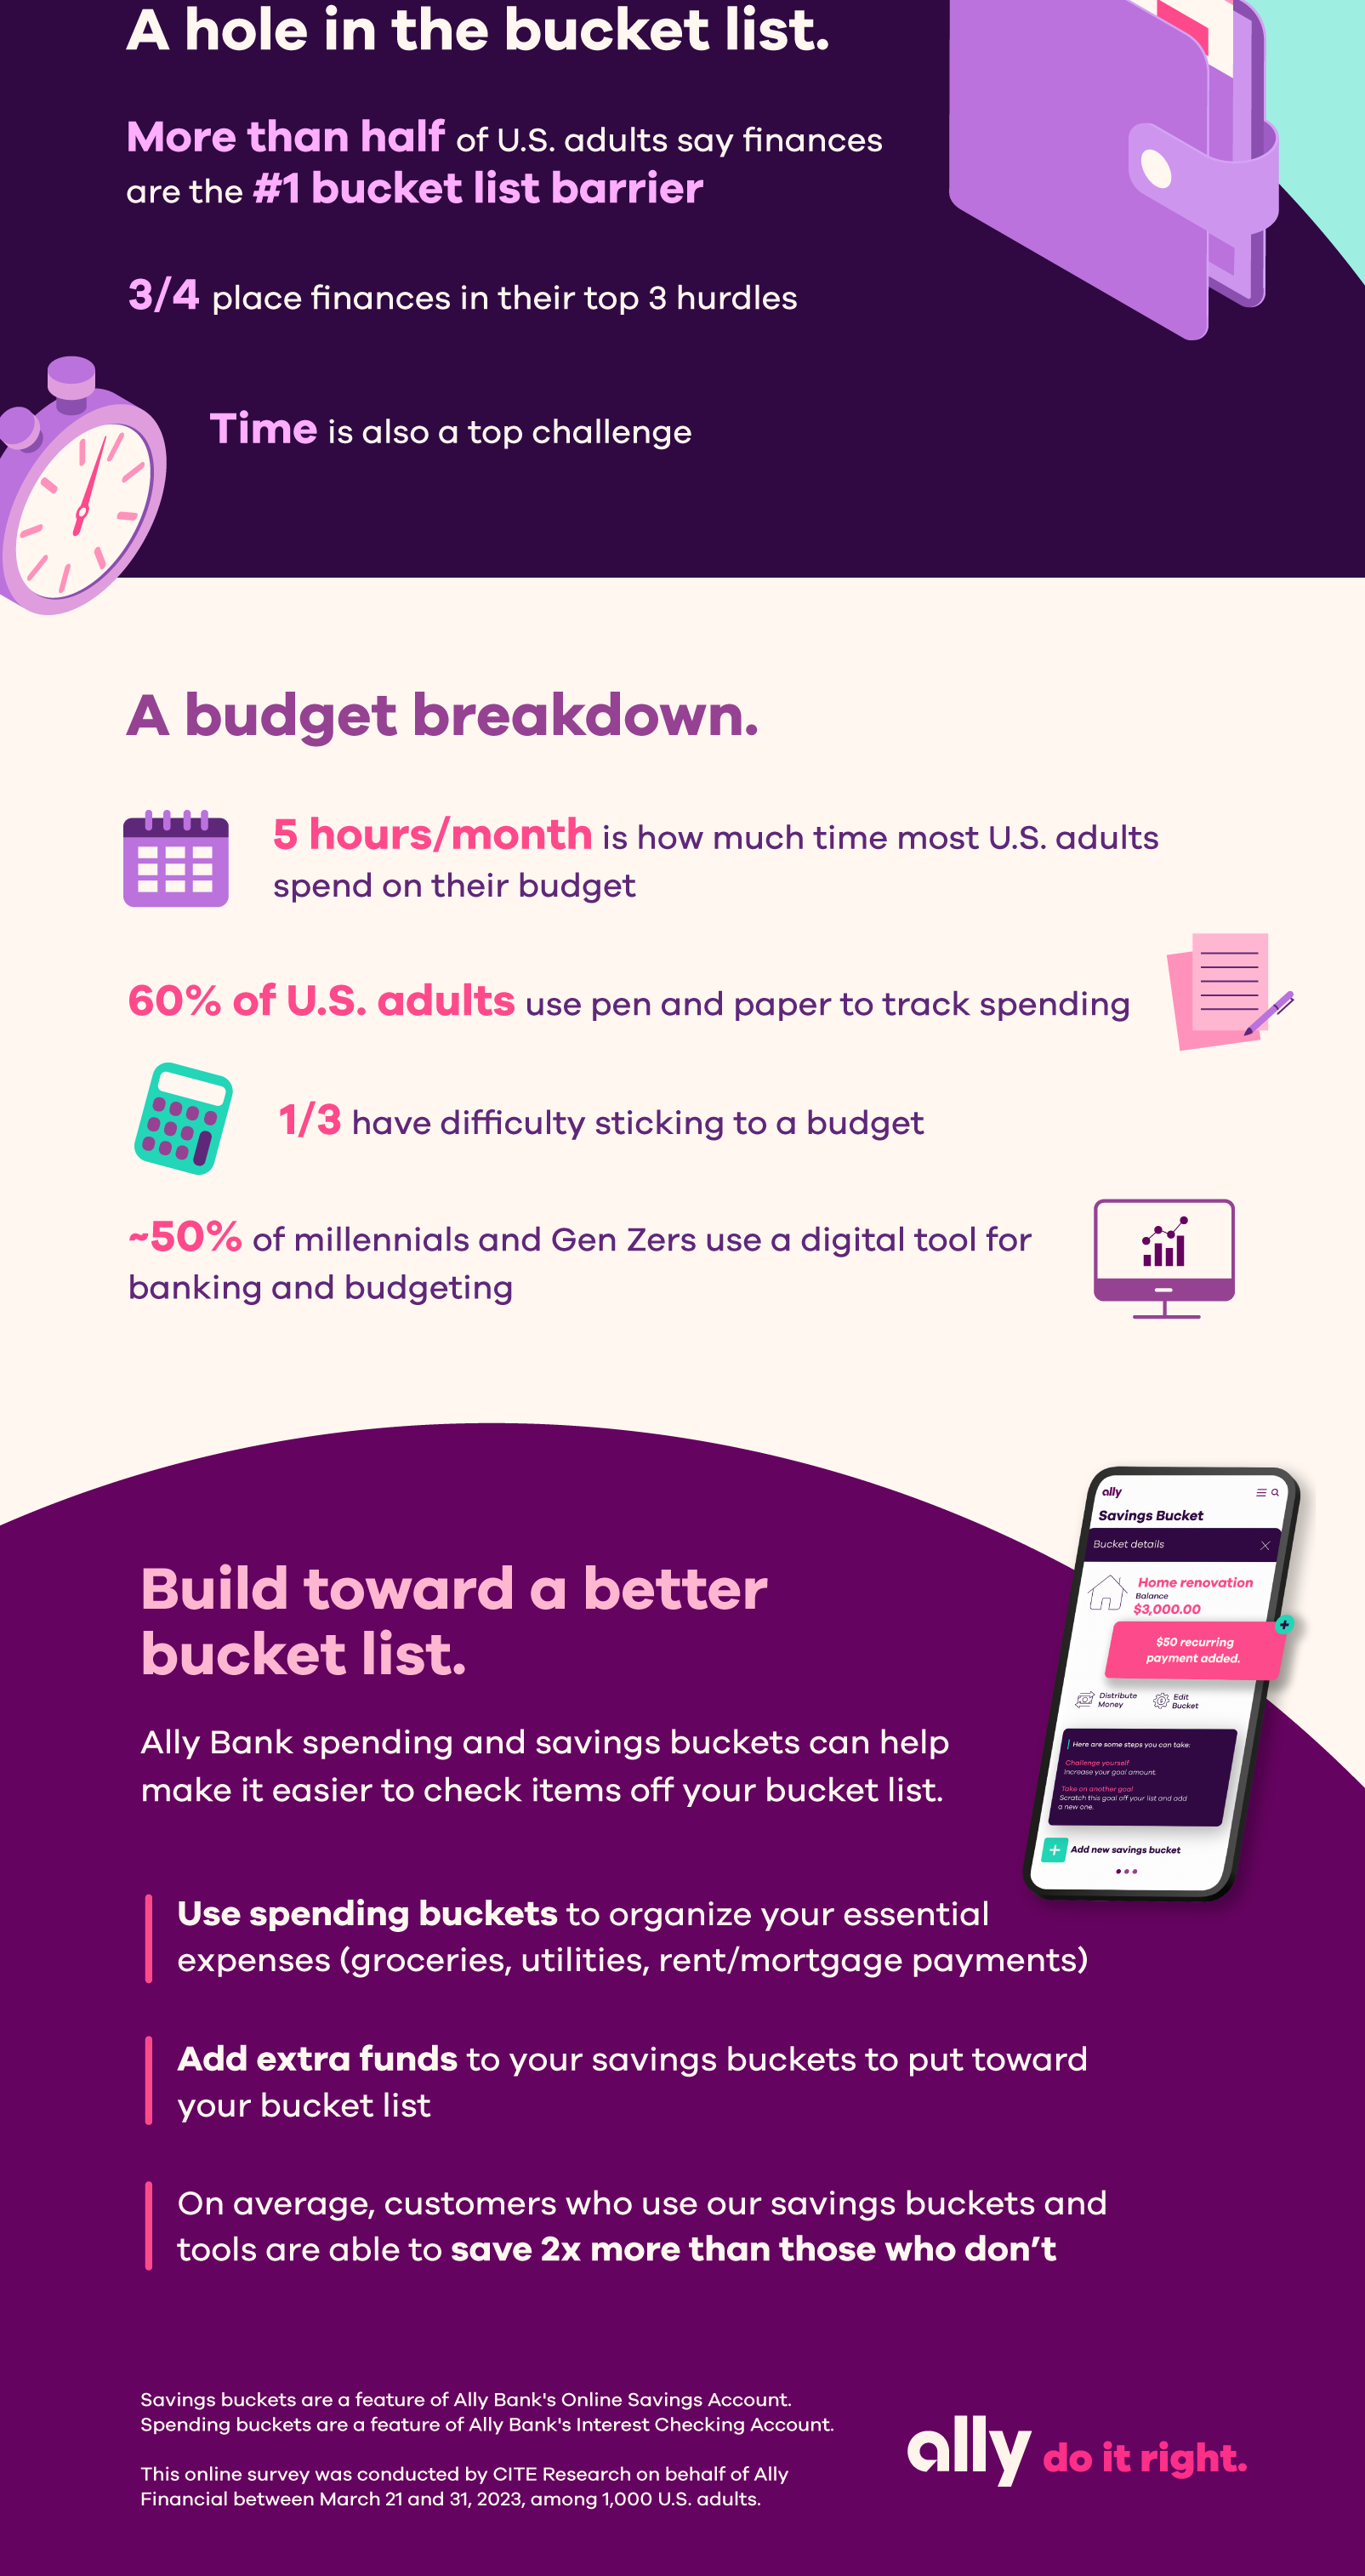 A hole in the bucket list: More than half of U.S. adults say finances are the #1 bucket list barrier, while 3/4 place finances in their top 3 hurdles with time listed as a top challenge, too. A budget breakdown: 5 hours/month is how much time most U.S. adults spend on their budget. 60% of U.S. adults use pen and paper to track spending. 1/3 have difficulty sticking to a budget. About 50% of millennials and Gen Zers use a digital tool for banking and budgeting. Build toward a better bucket list: Ally Bank spending and savings buckets can help make it easier to check items off your bucket list. Use spending buckets to organize your essential expenses (groceries, utilities, rent/mortgage payments). Add extra funds to your savings buckets to put toward your bucket list. On average, customers who use our savings buckets and tools are able to save 2x more than those who don’t. Savings buckets are a feature of Ally Bank’s Online Savings Account. Spending buckets are a feature of Ally Bank’s Interest Checking Account. This online survey was conducted by CITE Research on behalf of Ally Financial between March 21 and 31, 2023, among 1,000 U.S. adults. Ally Do It Right logo.